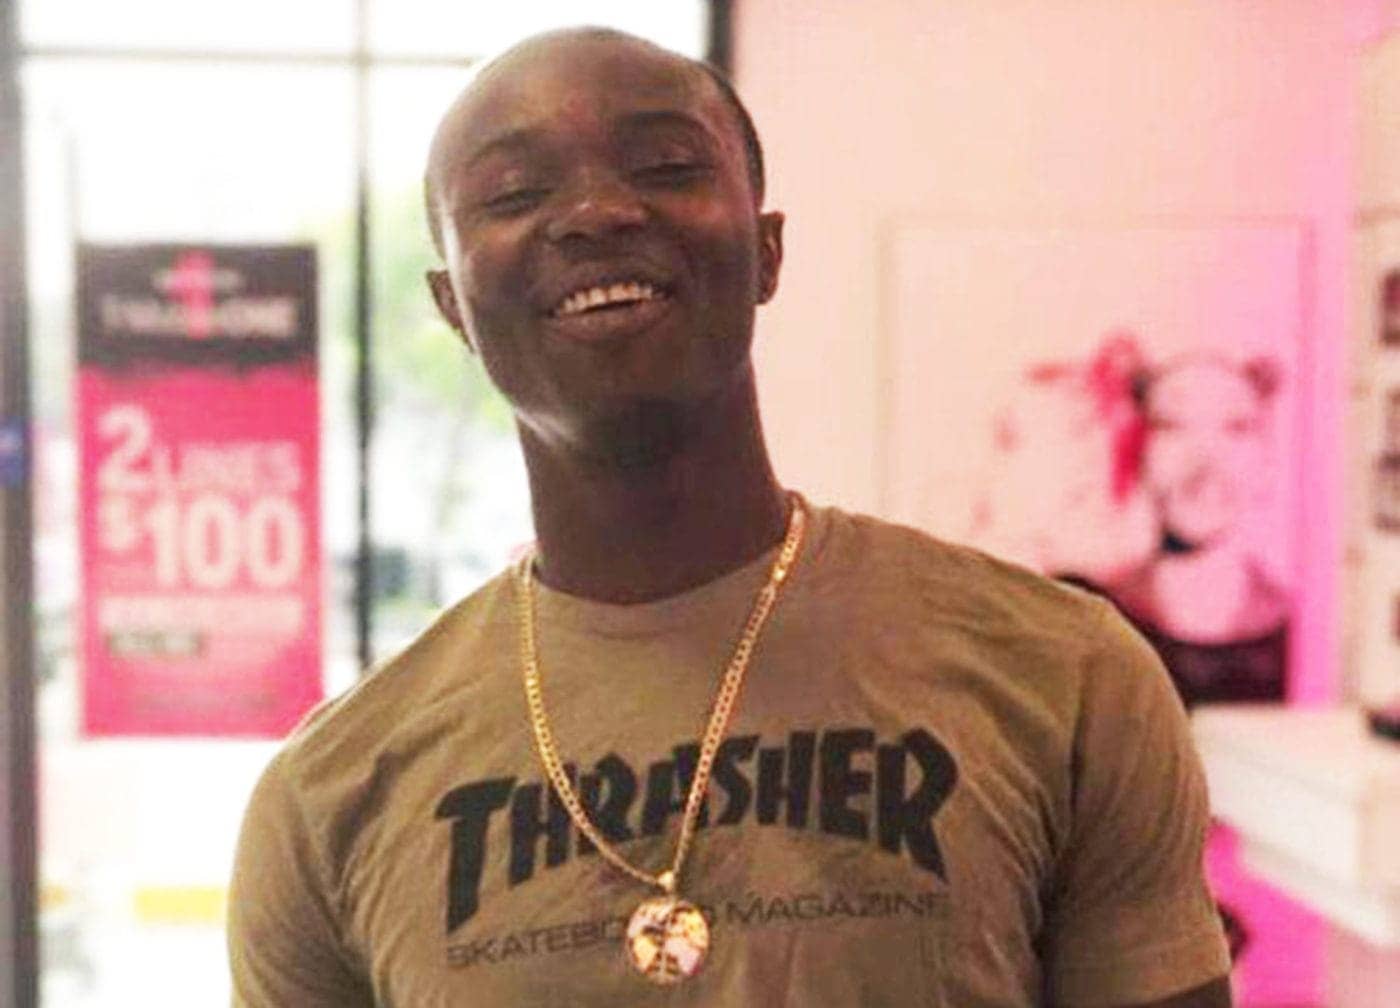 Willie-‘Bo-McCoy-Vallejo-rapper-1999-2019-1400x1008, Vallejo PD death squad: One year after Sean Monterrosa’s death at the hands of police, DOJ finds pattern of abuse, Local News & Views 